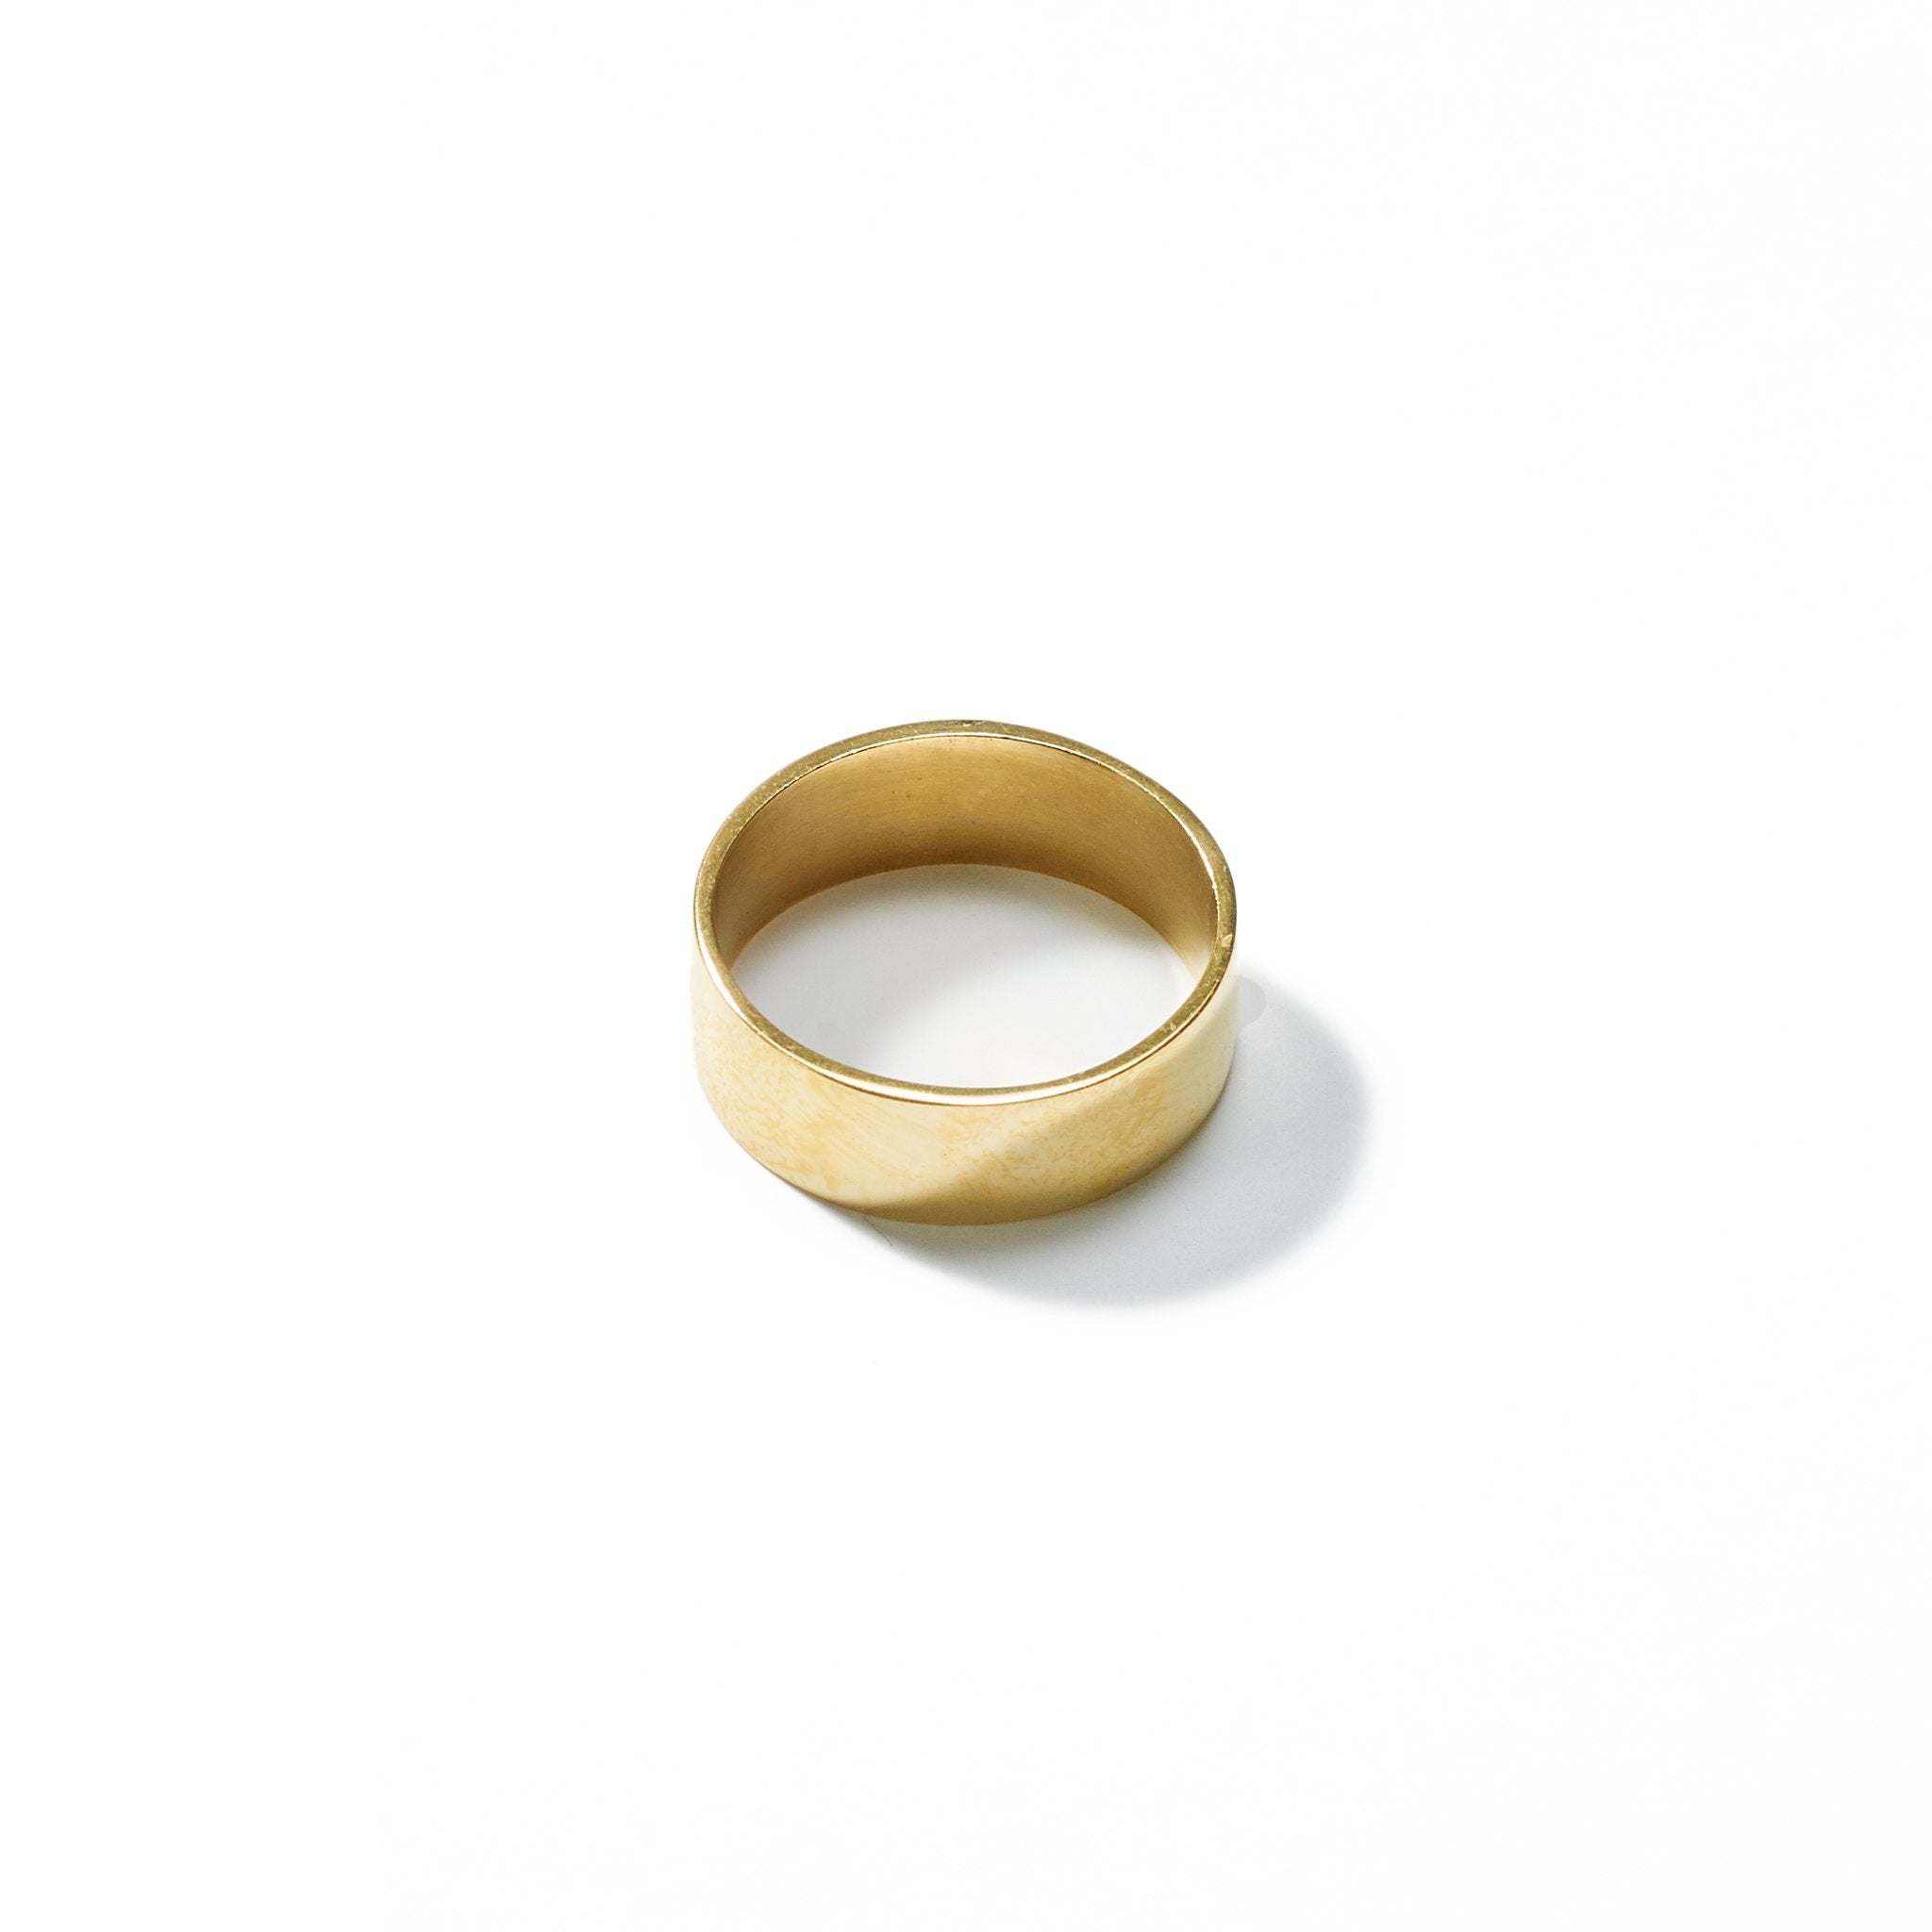 A classic and understated size 4.5 ring, of medium width, handcrafted from upcycled brass.Perfect for stacking or beautiful alone.